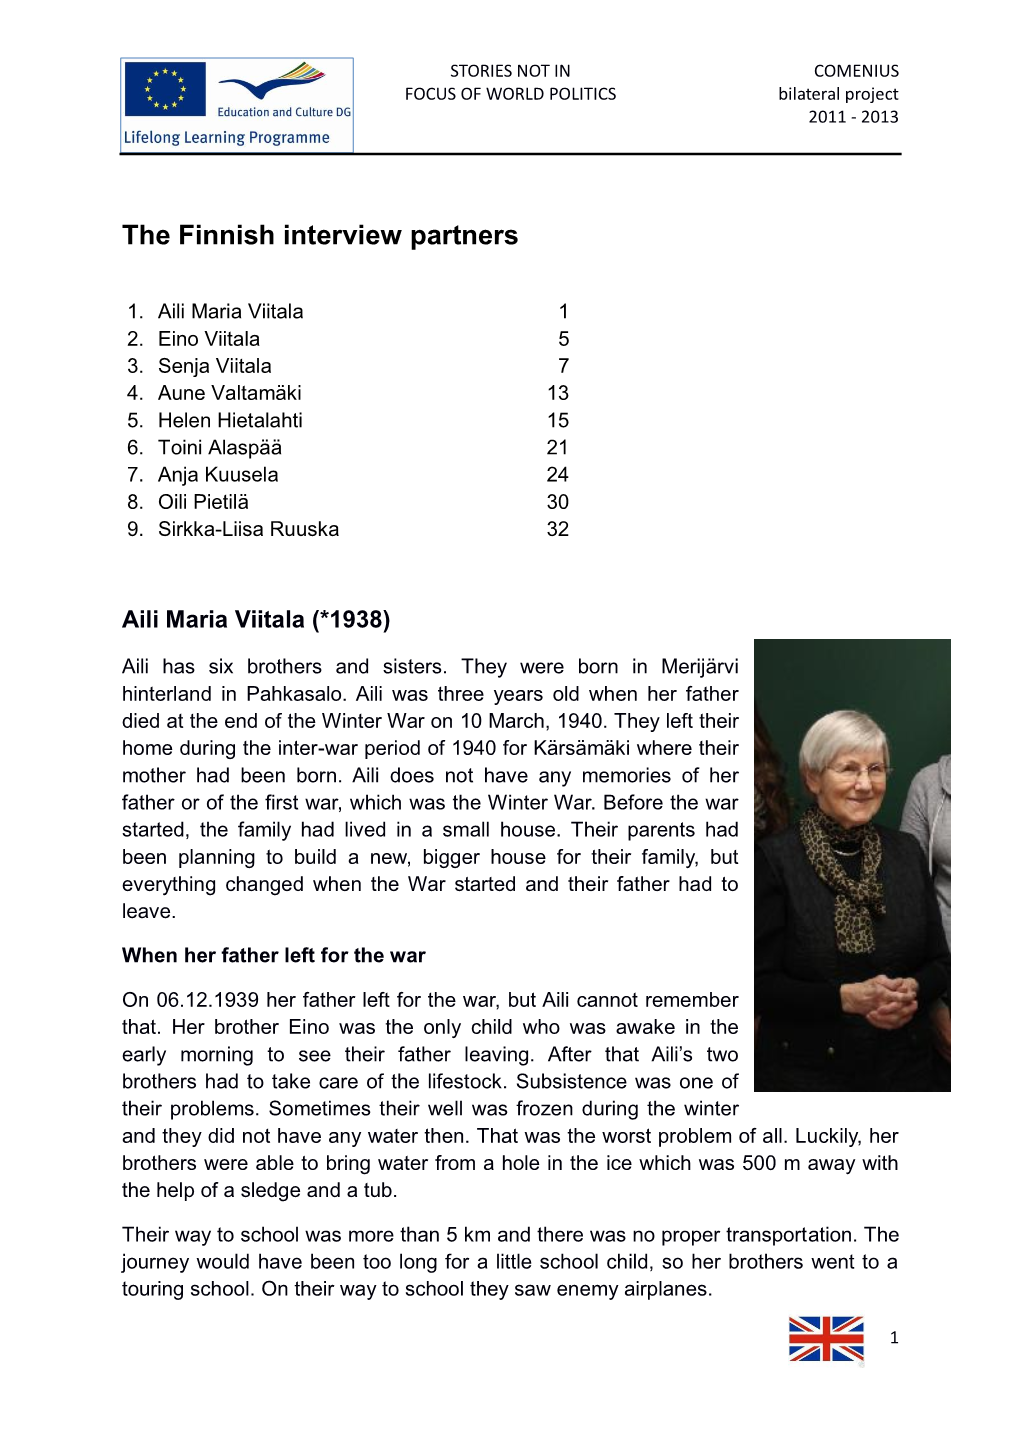 The Finnish Interview Partners